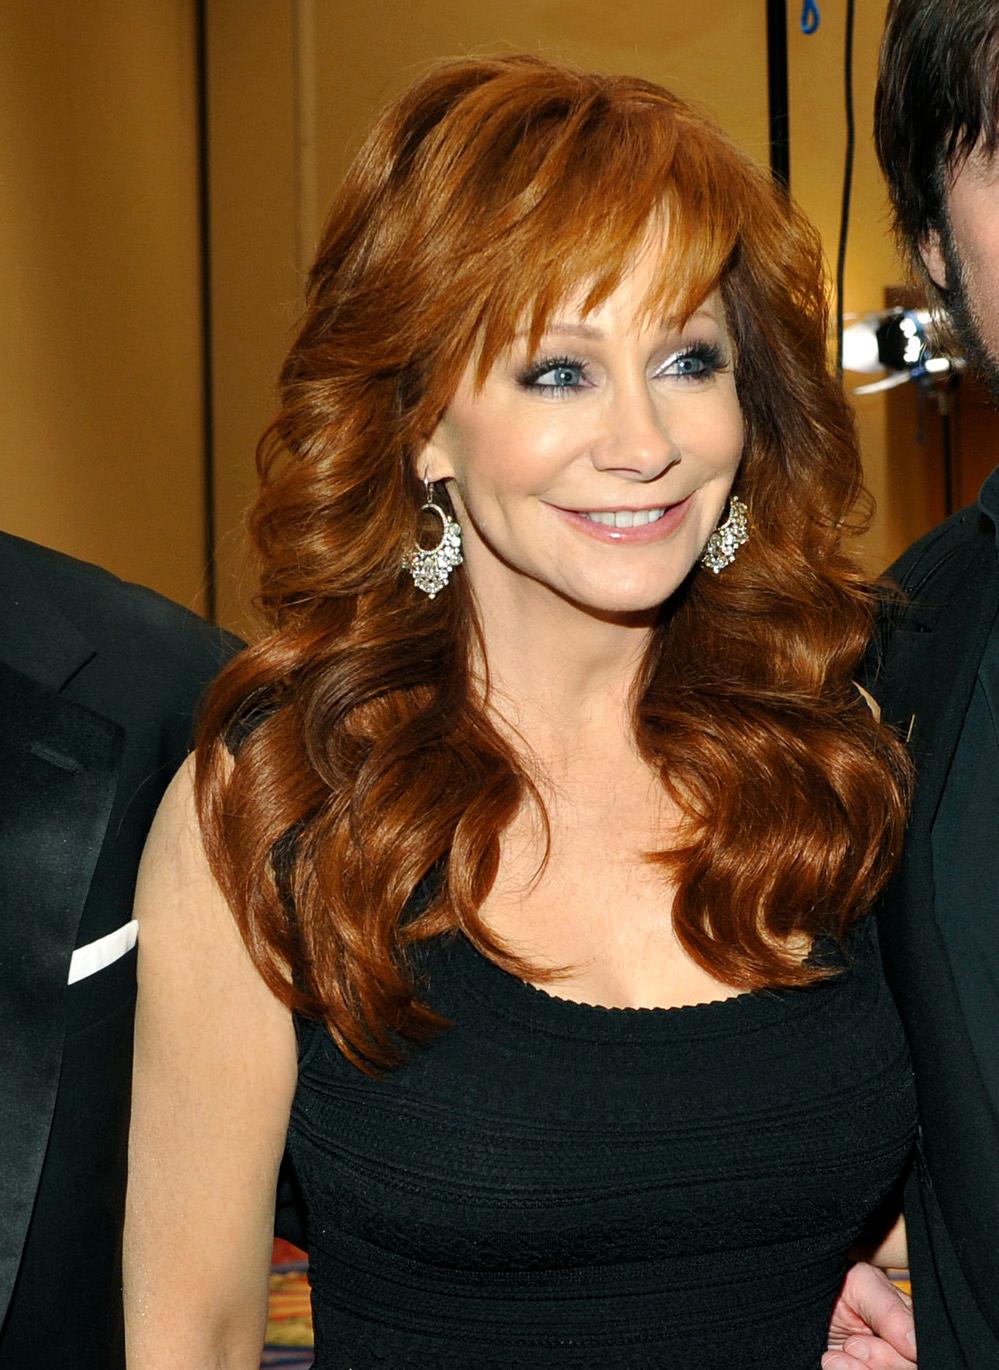 Reba McEntire attends Muhammad Ali's Celebrity Fight Night XIX in Phoenix, Arizona, on March 23, 2013 (©Getty Images | <a href="https://www.gettyimages.com.au/detail/news-photo/chairman-and-founder-of-the-celebrity-fight-night-news-photo/164450221">John Sciulli</a>)